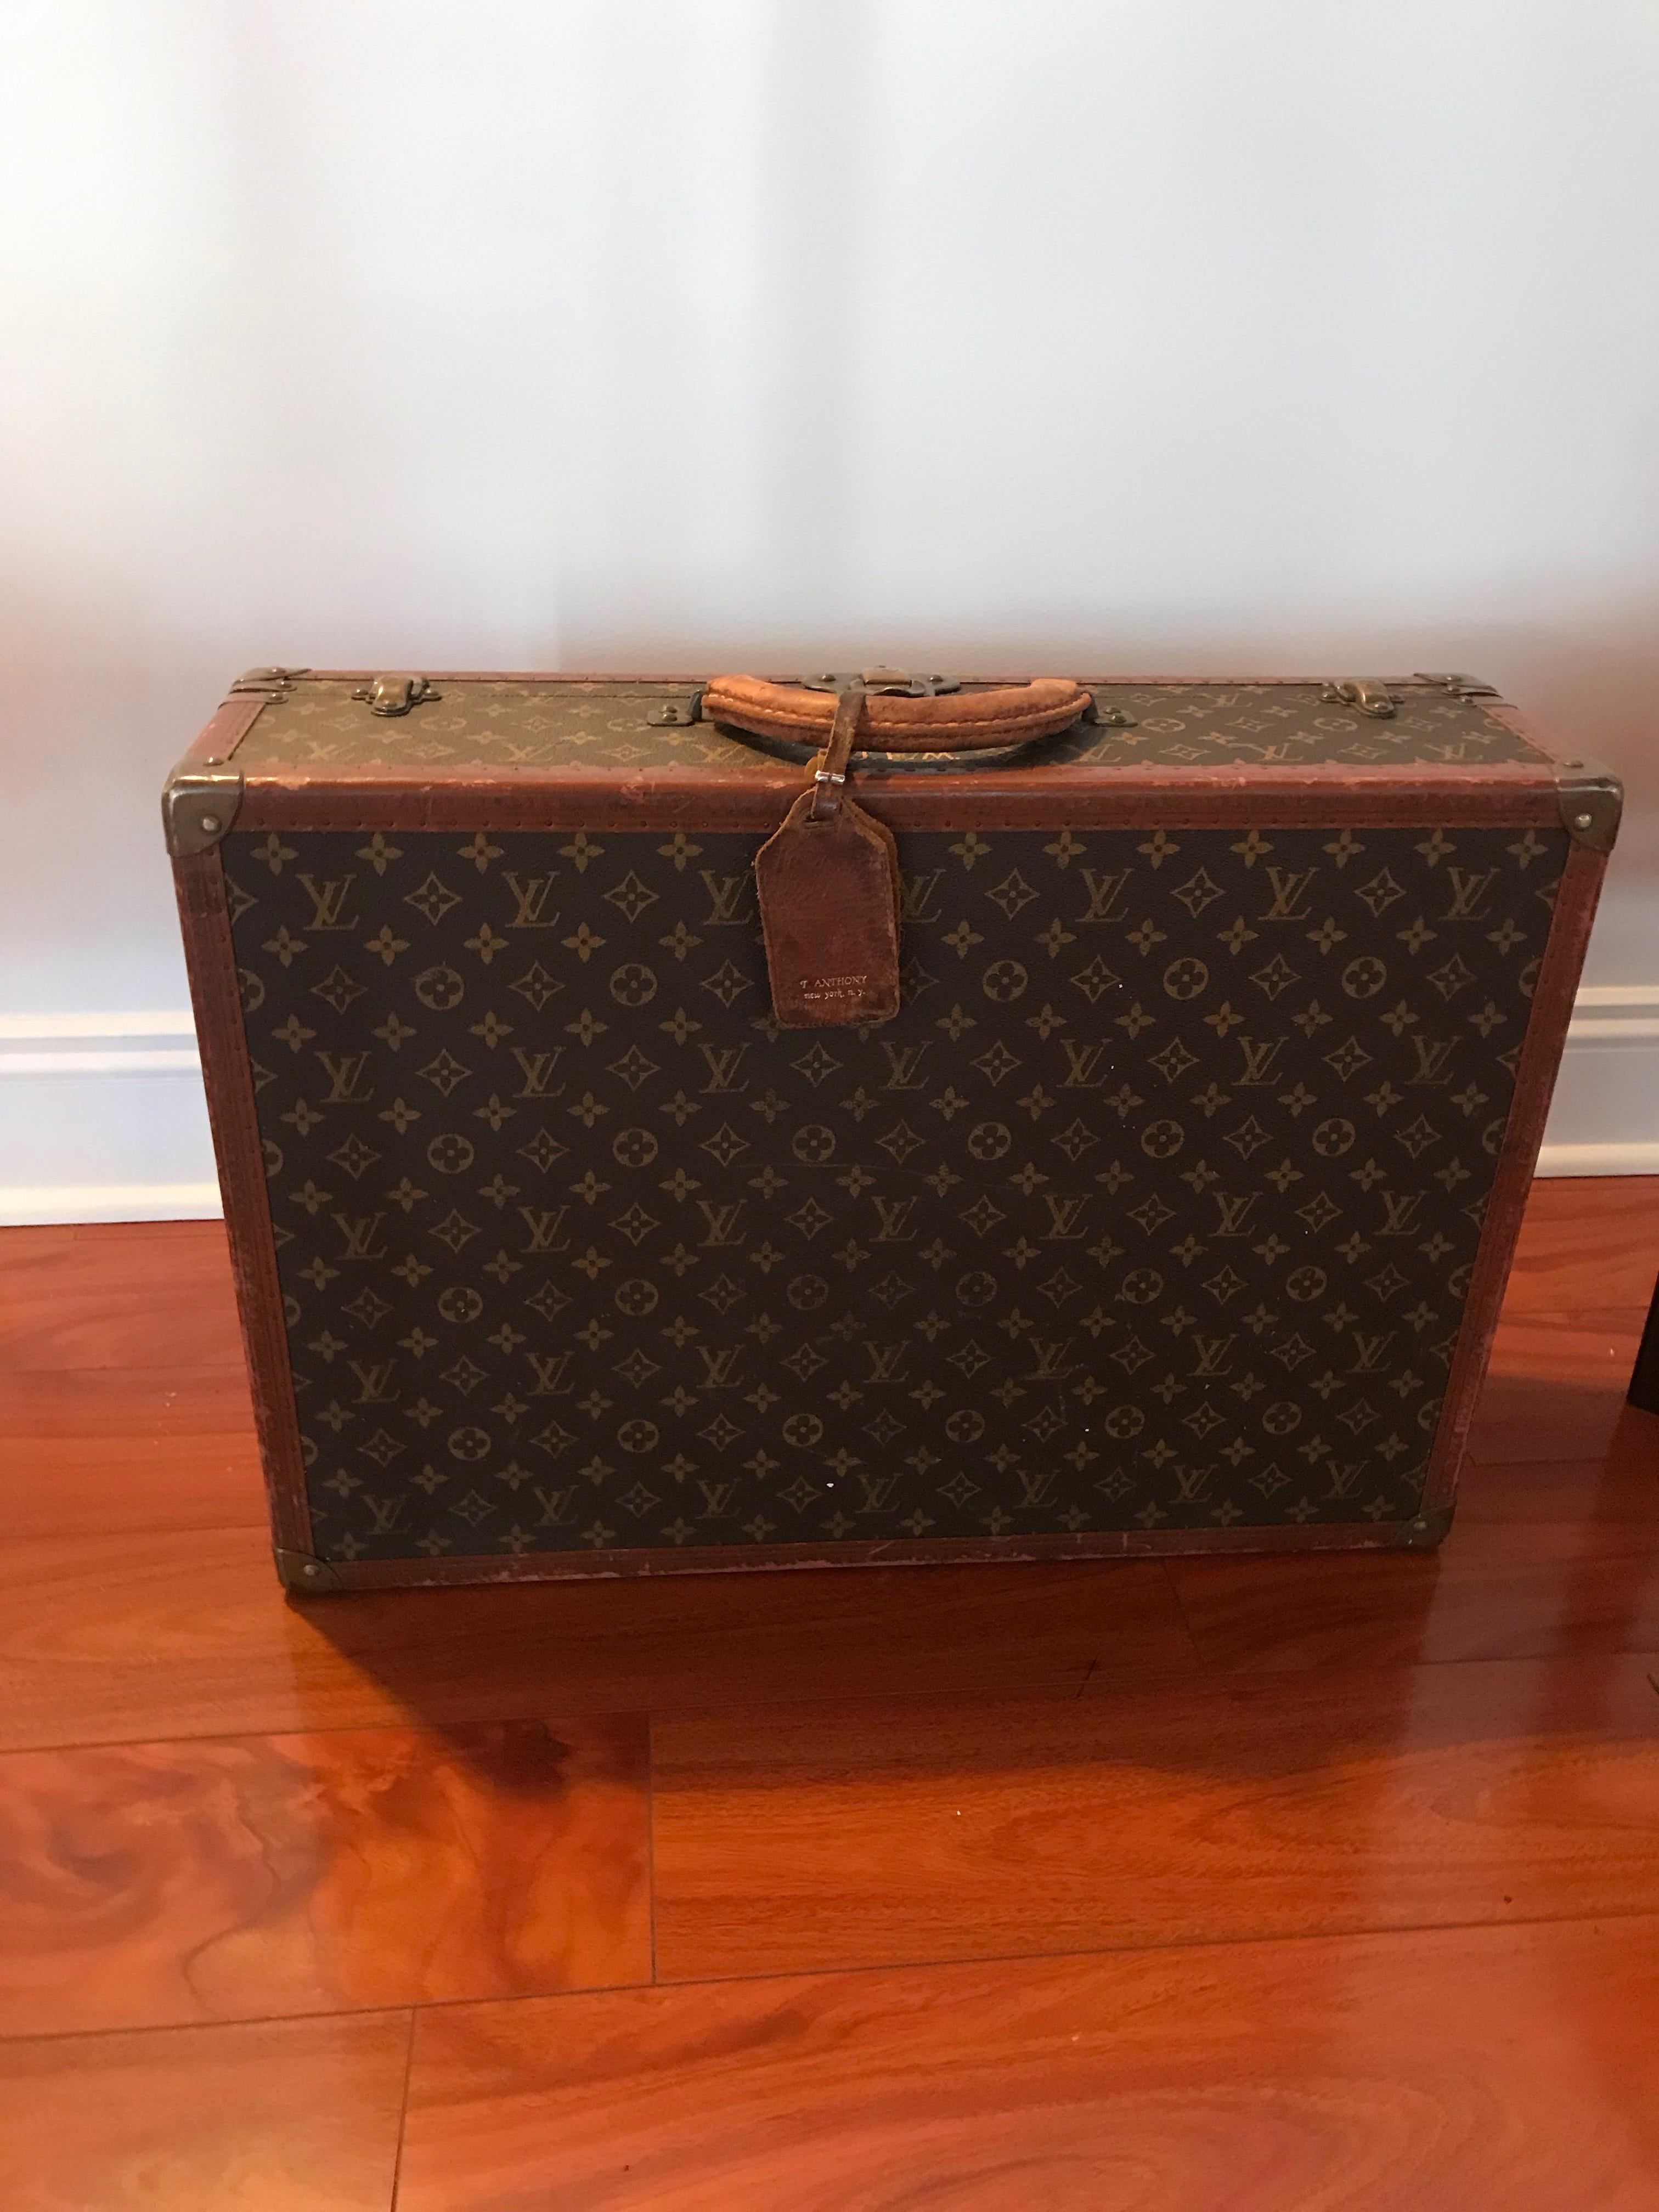 Brand: Louis Vuitton
Style: Bisten 60 vintage suitcase
Confirmed by Louis Vuitton Corporate, 1920s 
Condition: Fair/Good. From the estate of Henry Flager, who started Standard Oil in the late 1800s. 
Description: Interior clean with straps (see